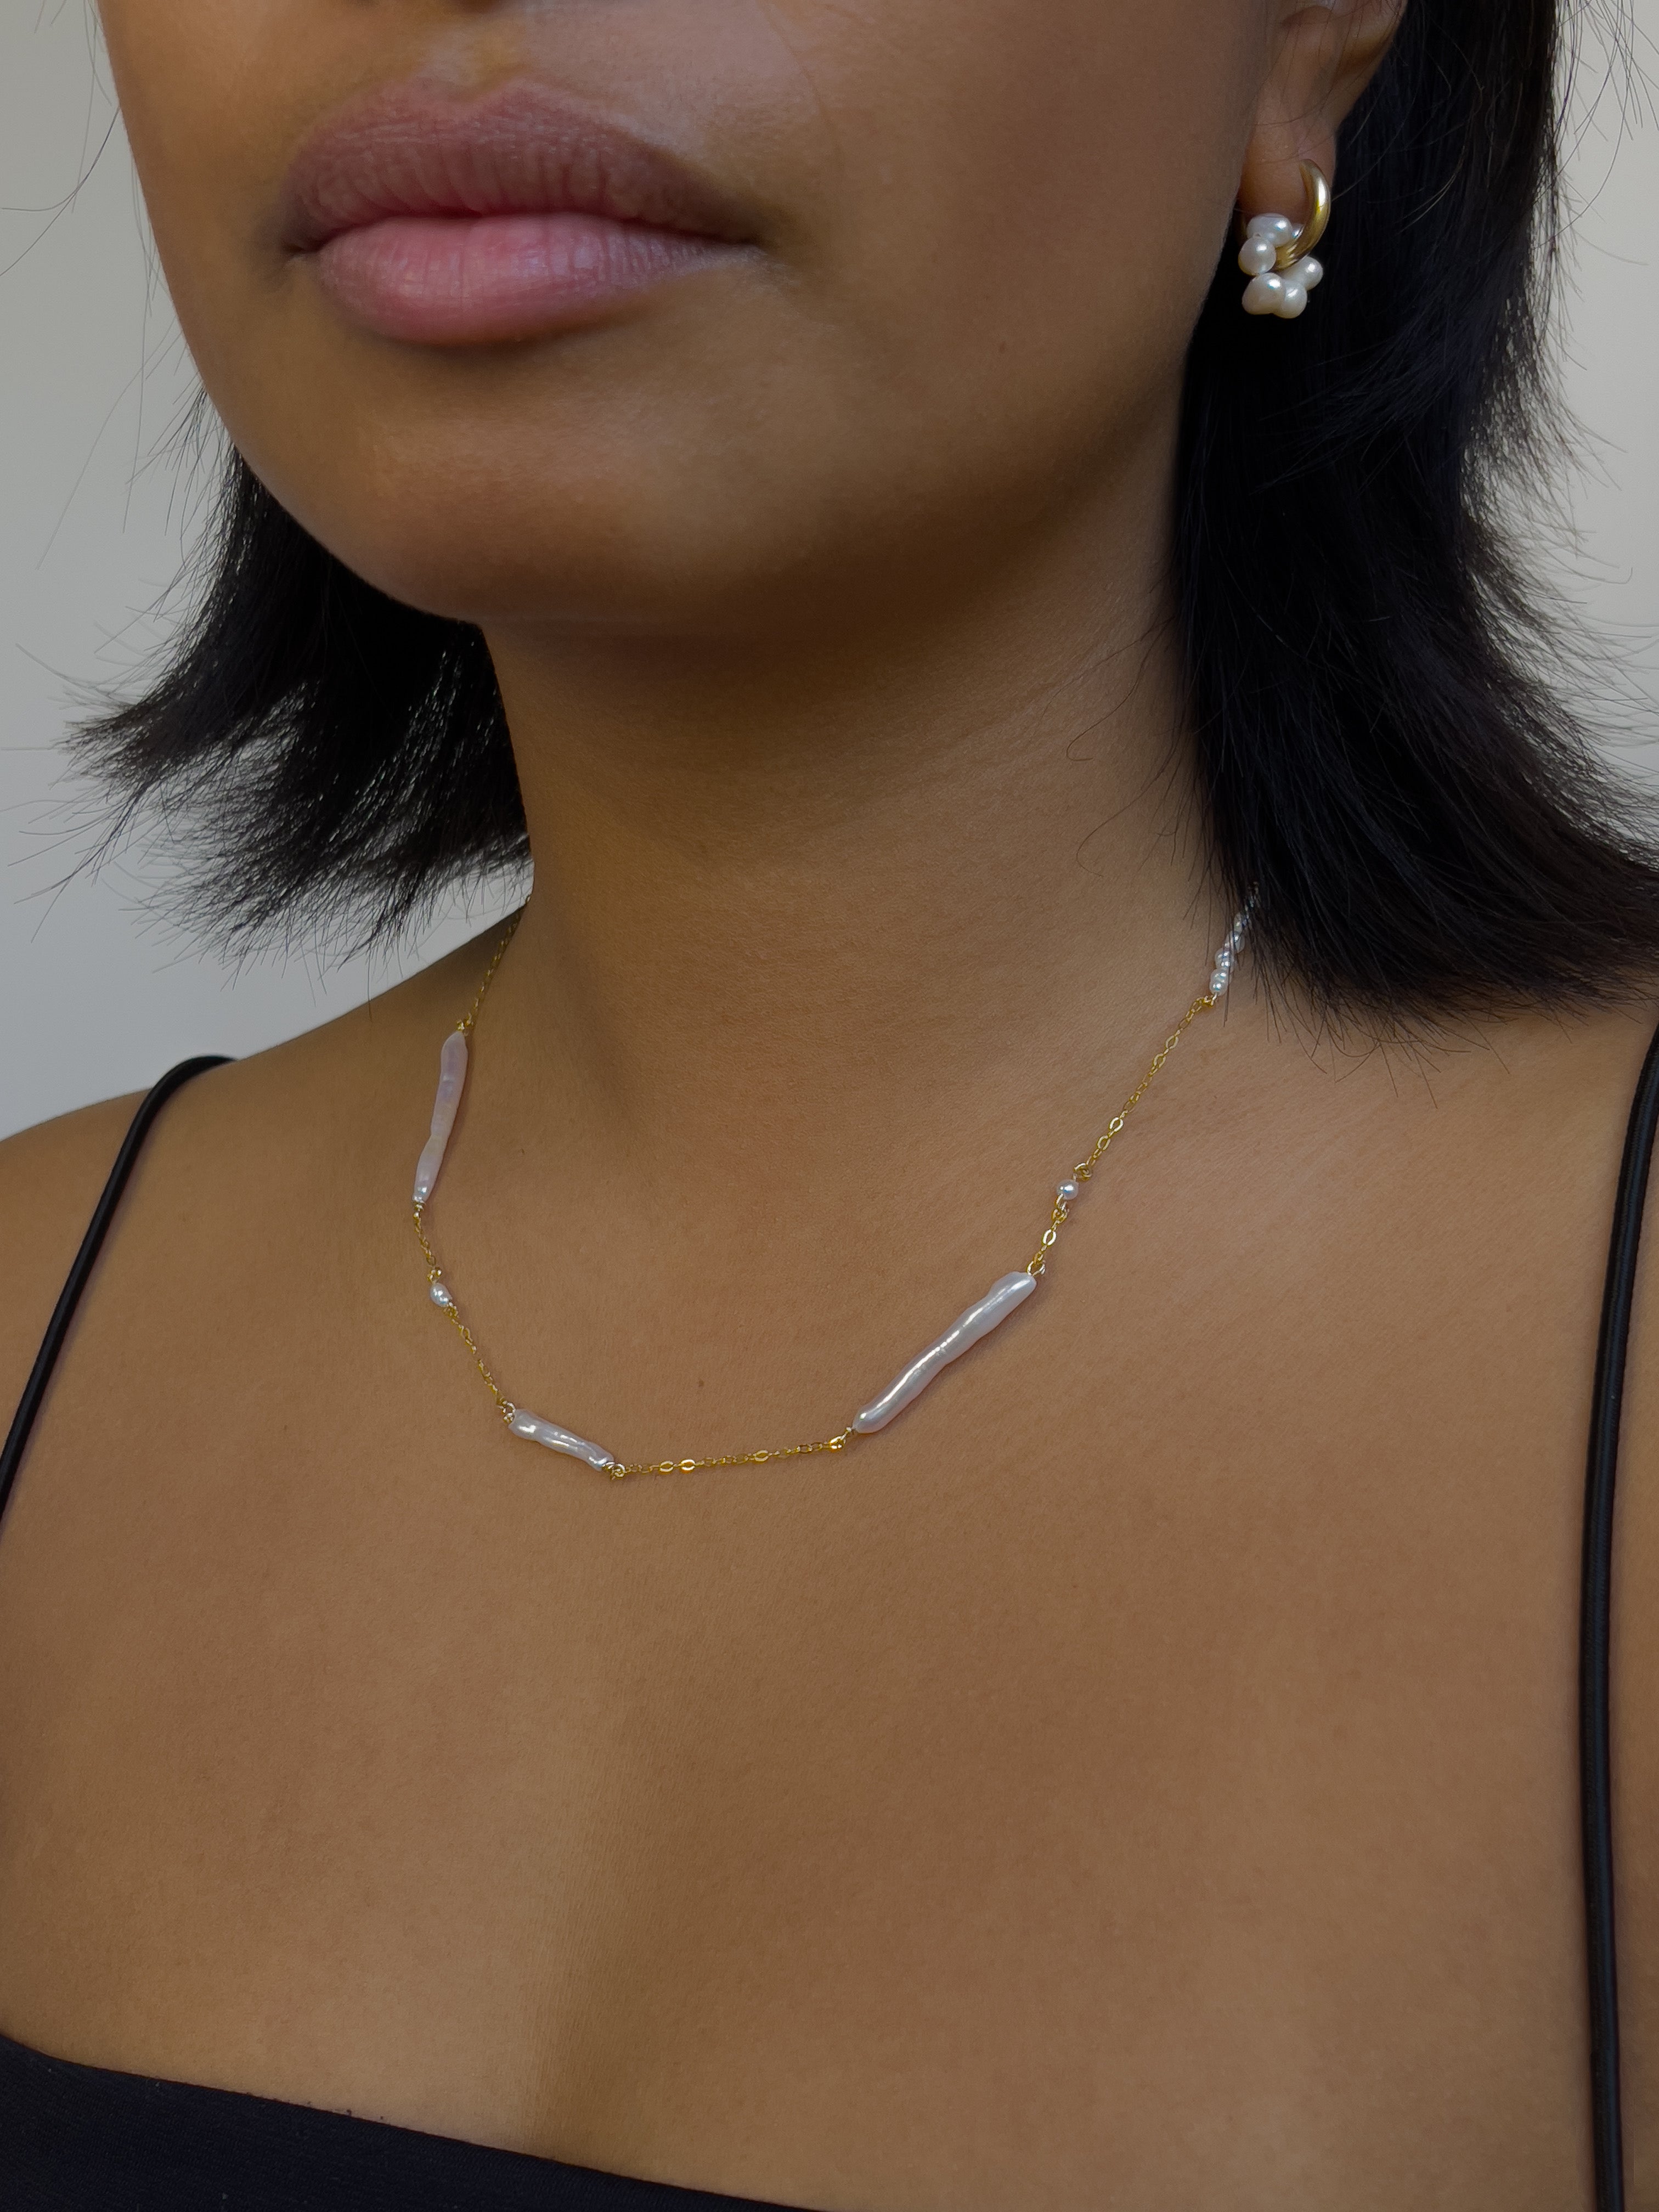 14 Karat Gold Plated Lariat Necklace with Chalcedony Drop - Wholesale  Silver Jewelry - Silver Stars Collection